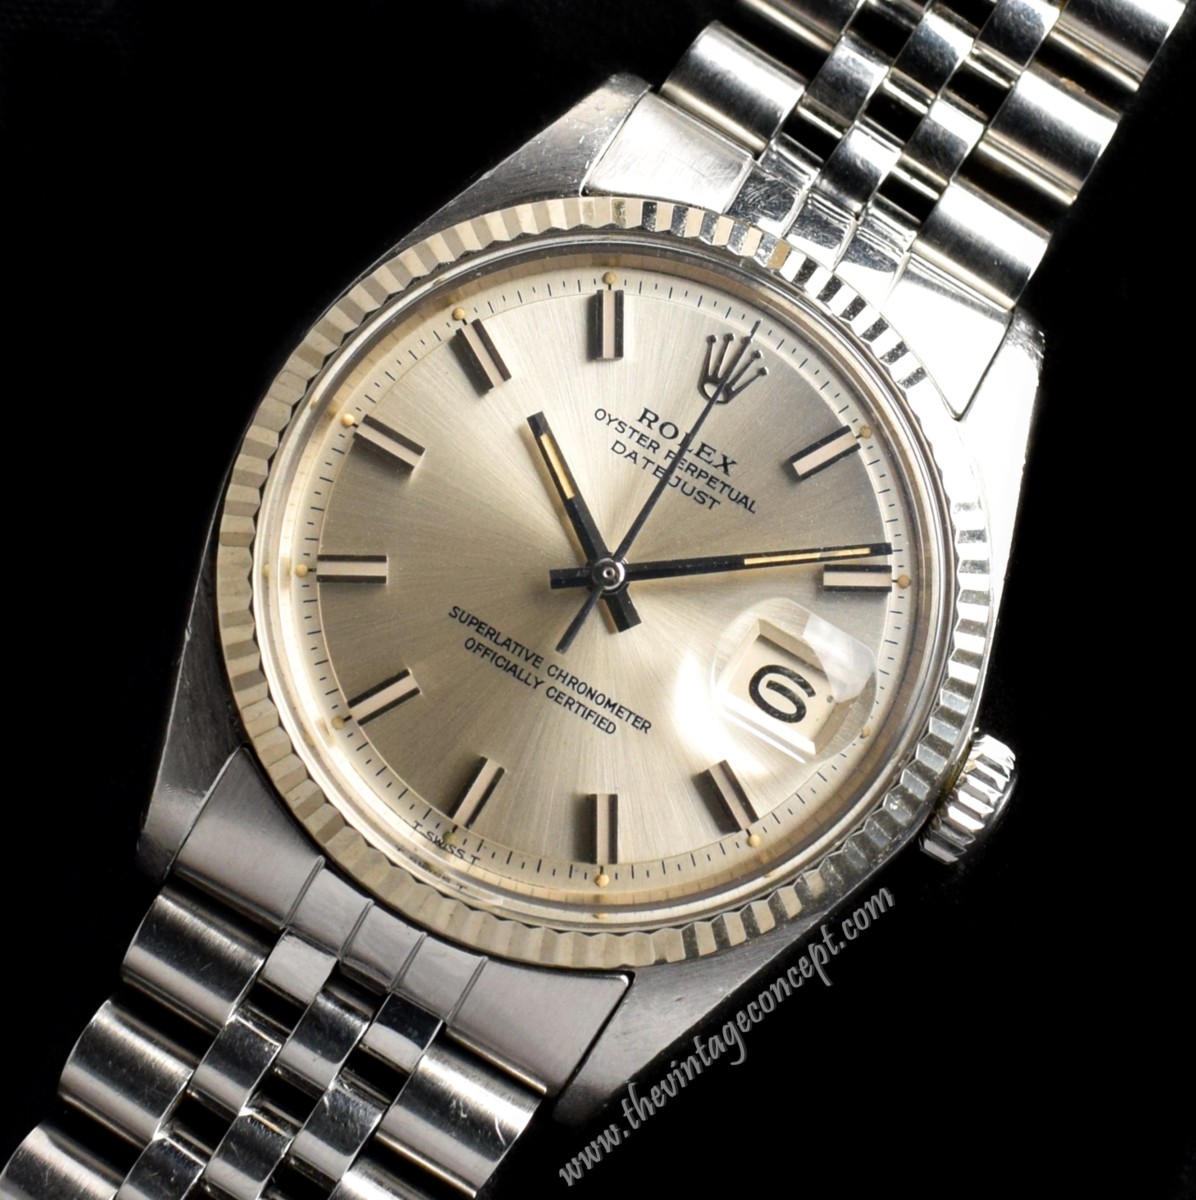 Rolex Datejust Silver Dial Wideboy 1601 (SOLD) - The Vintage Concept